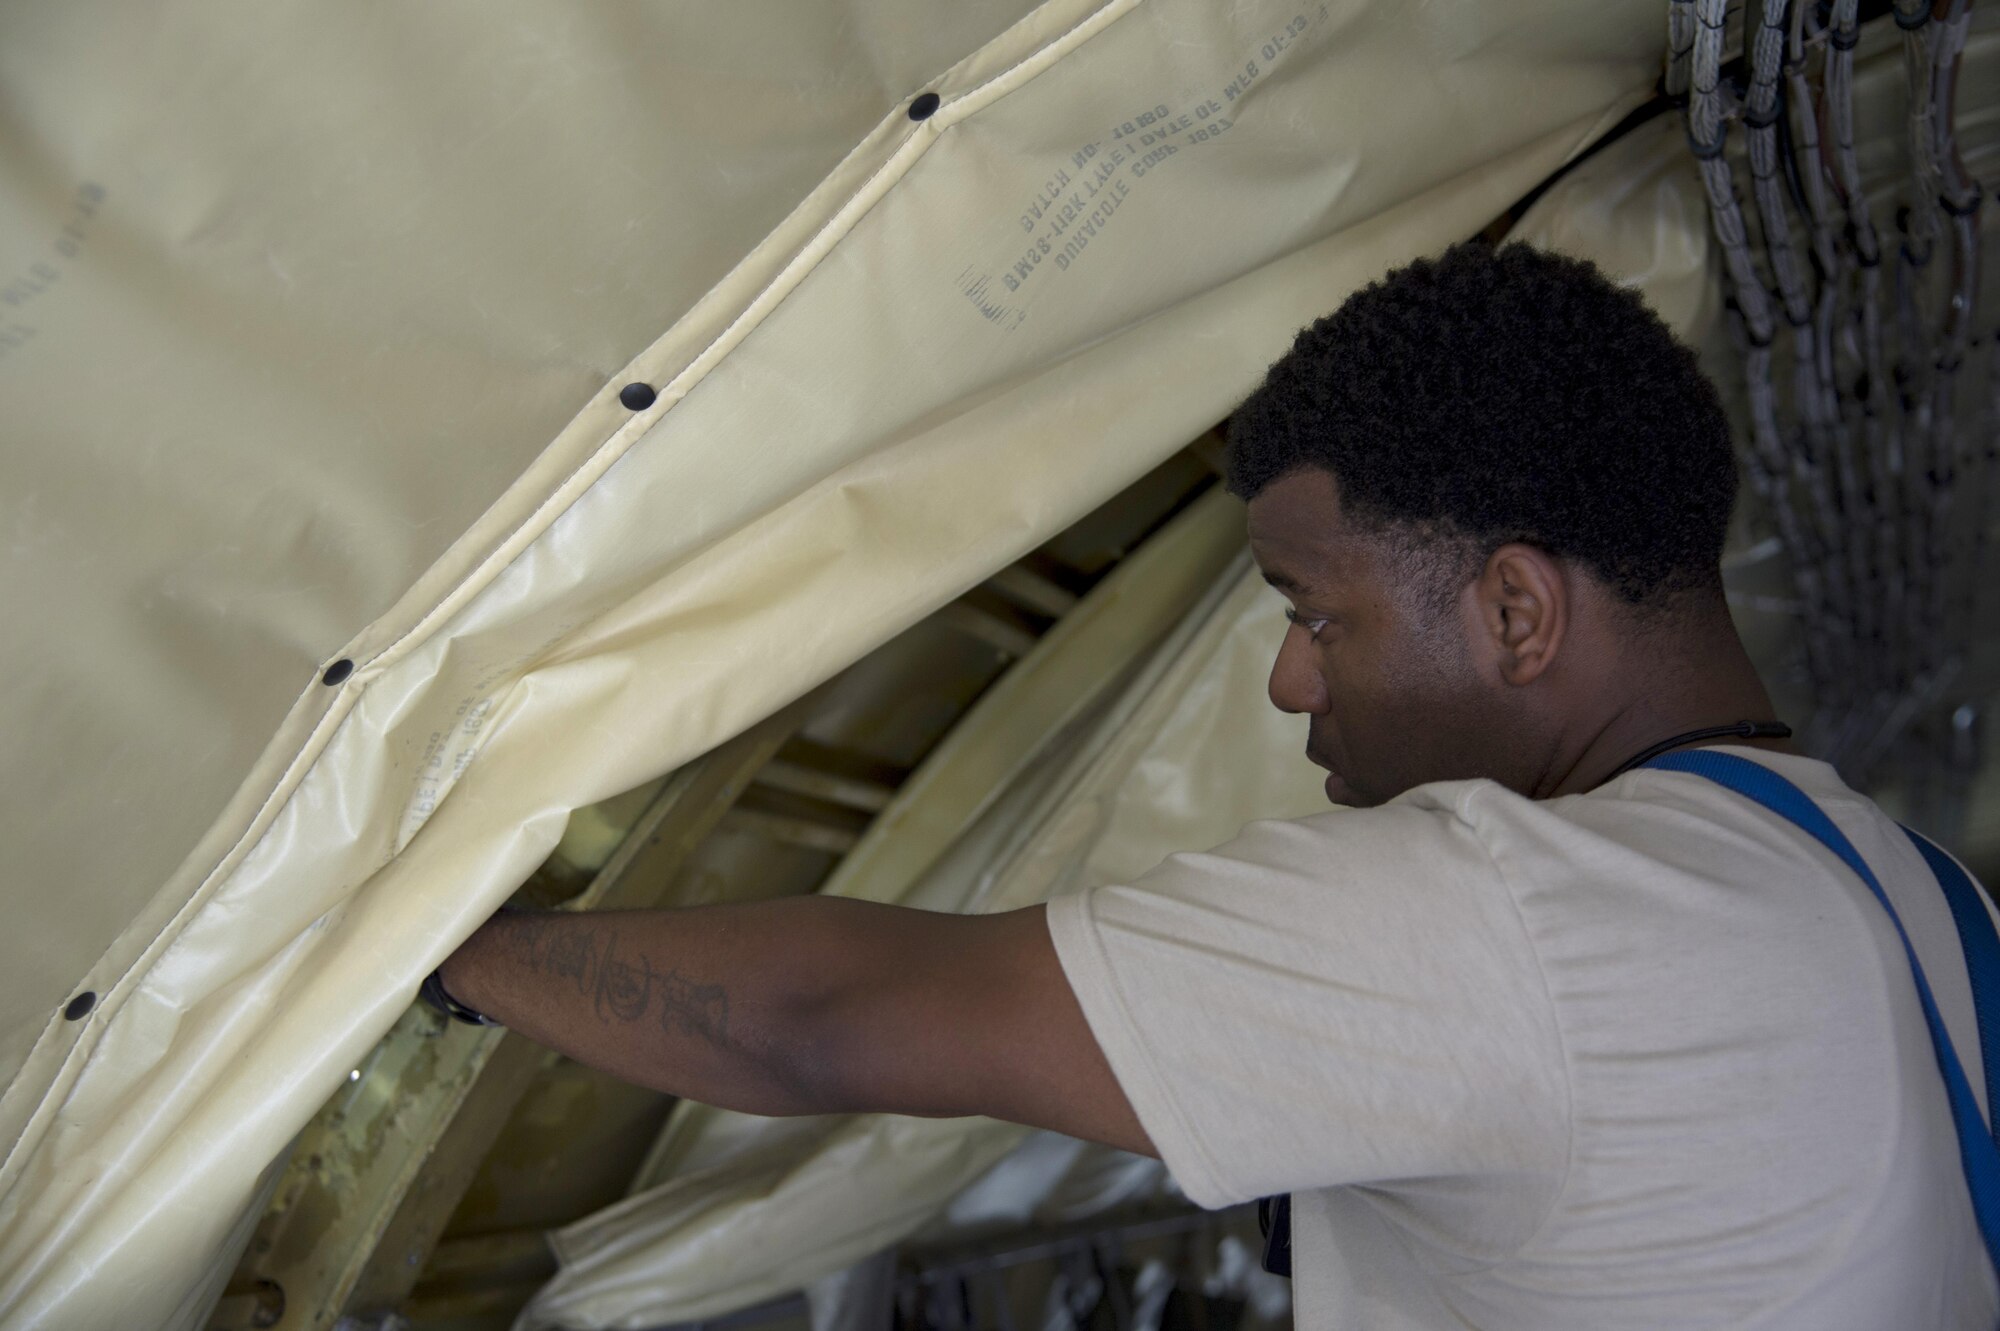 U.S. Air Force Tech. Sgt. Markas Williams, NCO in charge of the non-destructive inspection lab assigned to the 6th Maintenance Squadron, inspects a bulkhead on a KC-135 Stratotanker aircraft before using an X-ray machine at MacDill Air Force Base, Fla., Nov. 7, 2017.